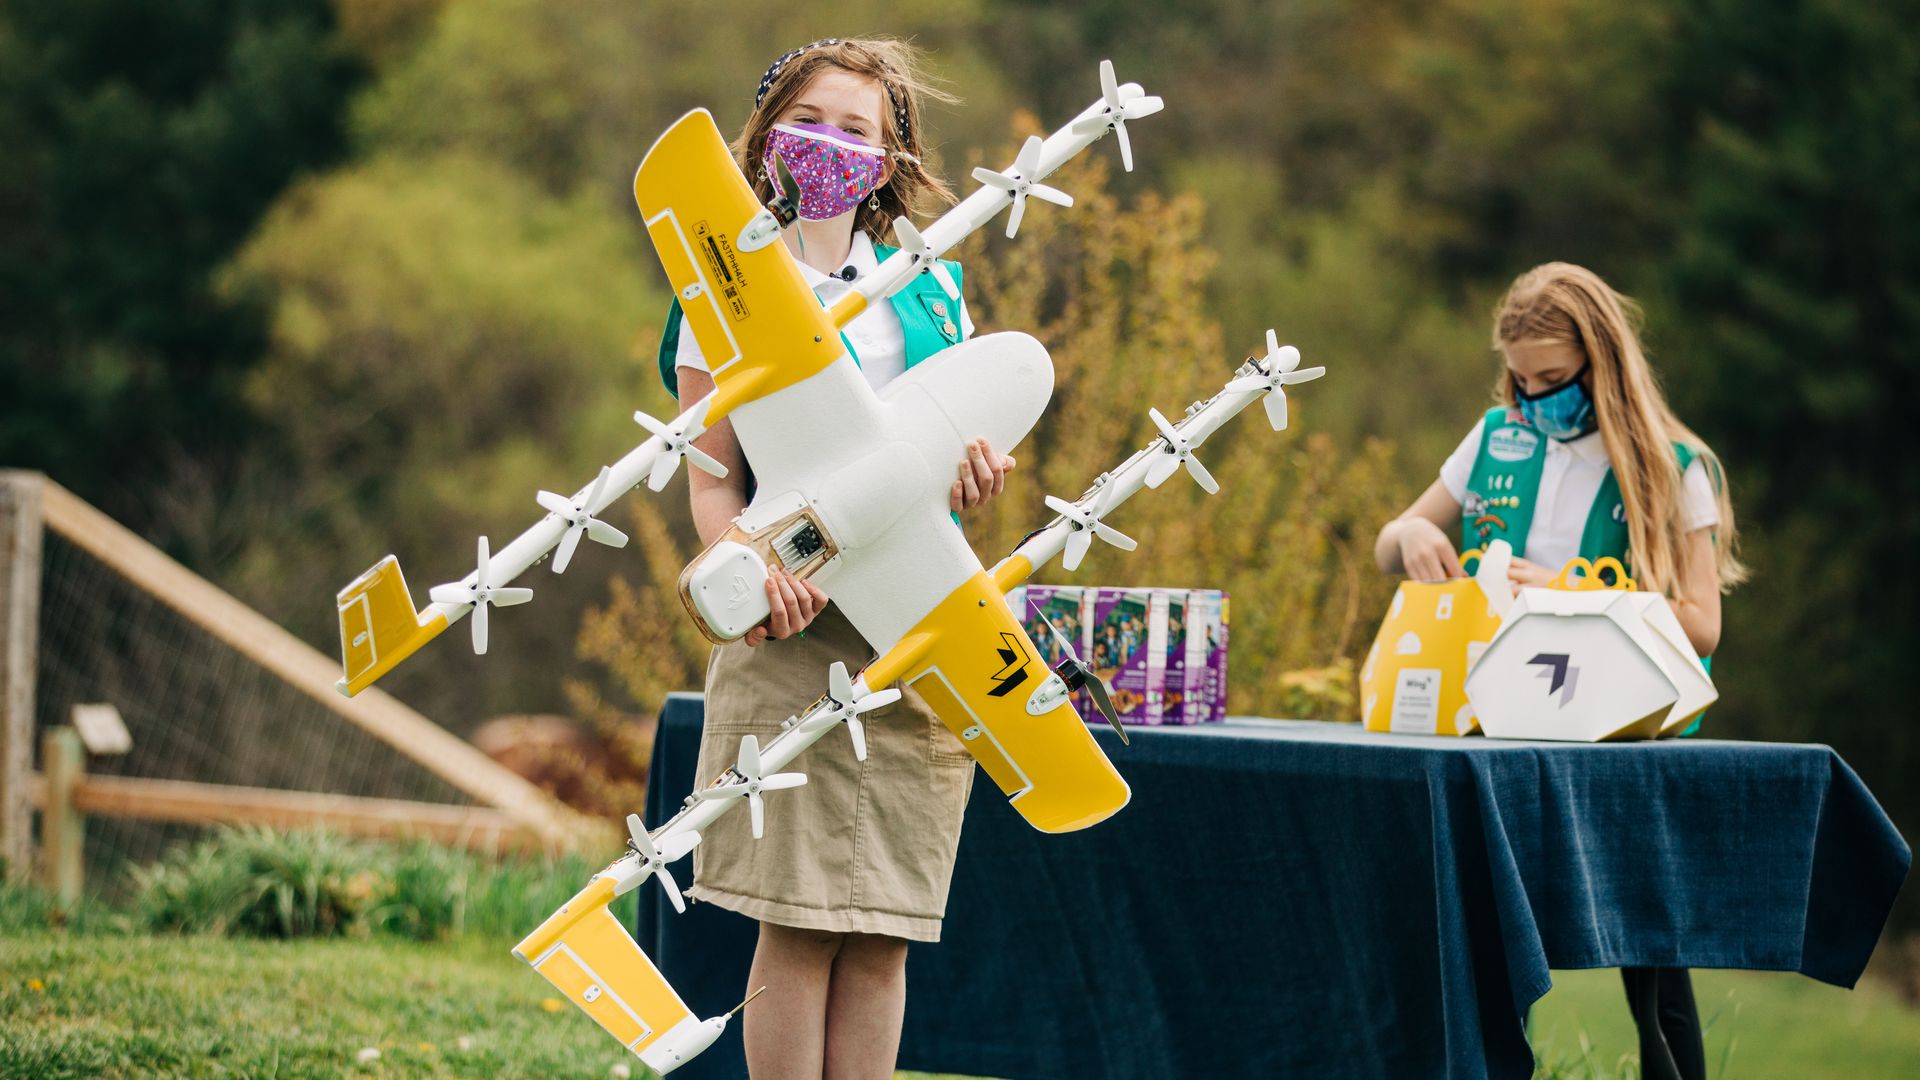 Two Virginia Girl Scouts prepare to send a cookie delivery via drone